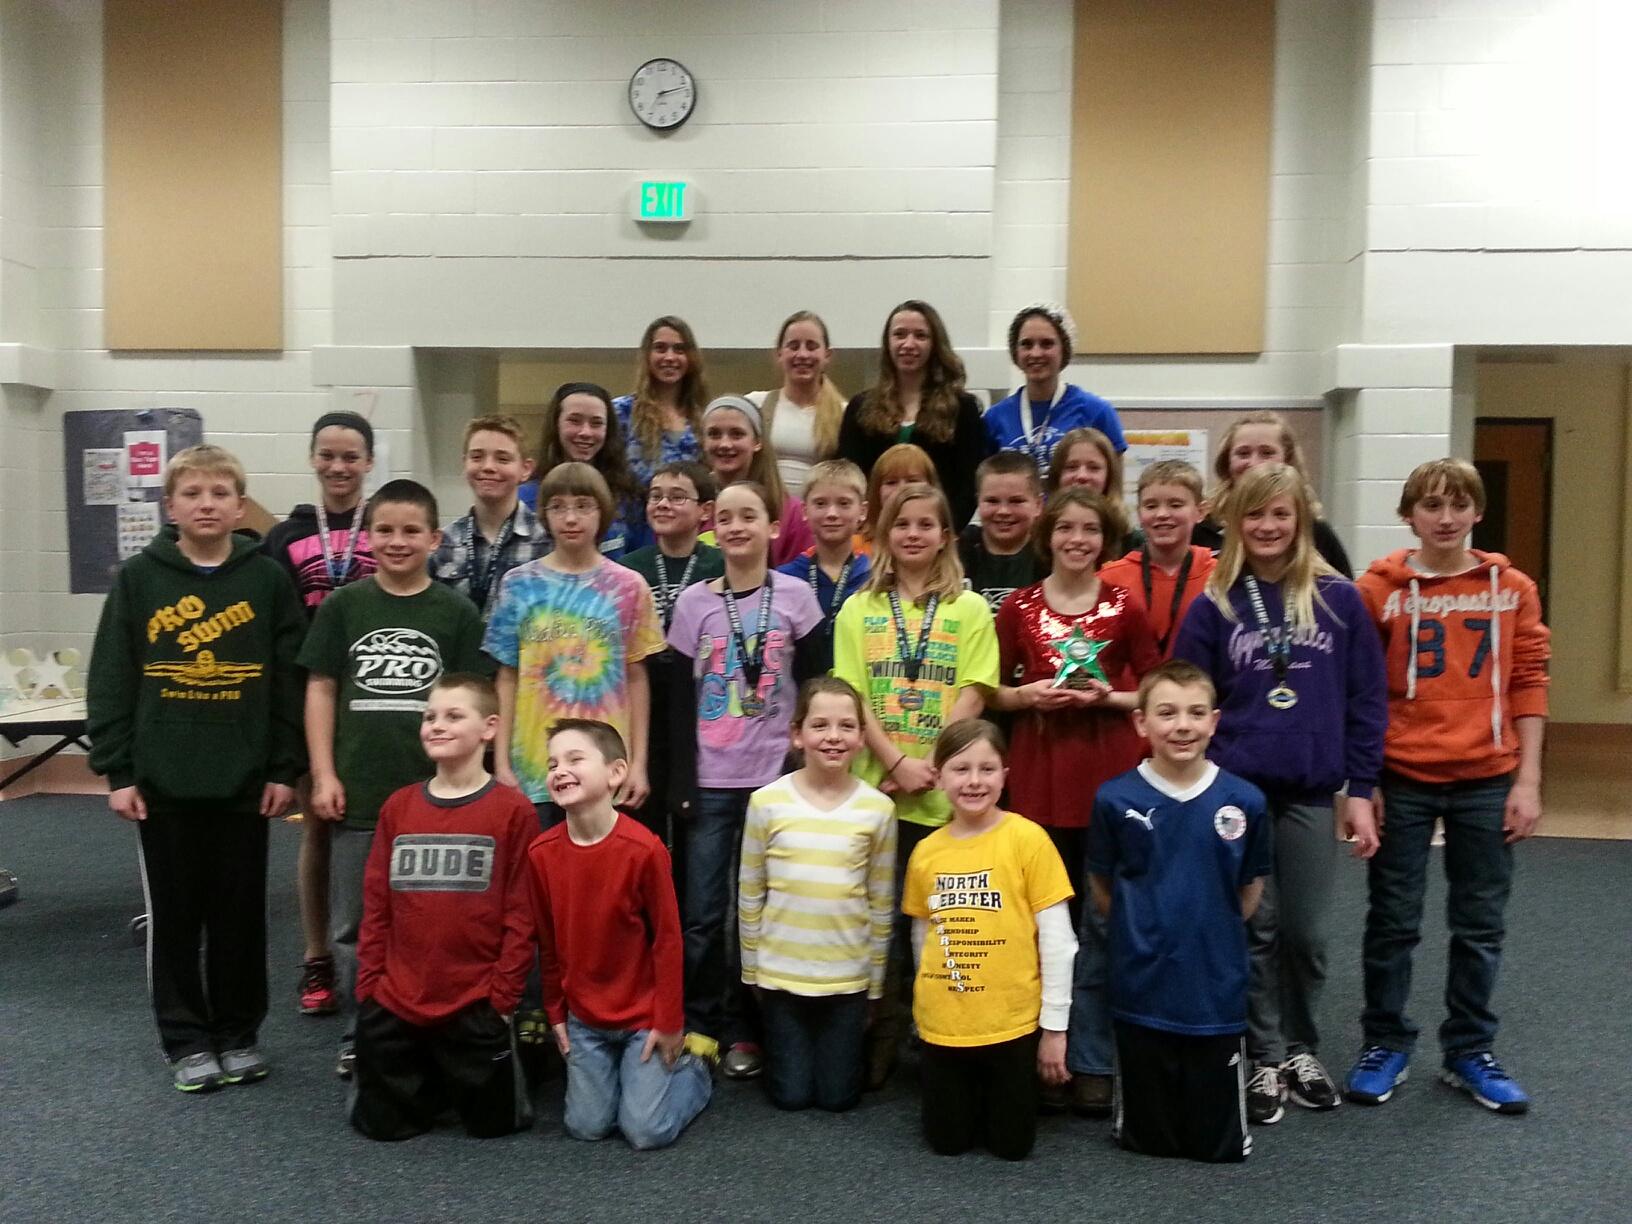 The PRO Swim Club, comprised of Wawasee area swimmers, announced its season awards Tuesday night. (Photo provided)